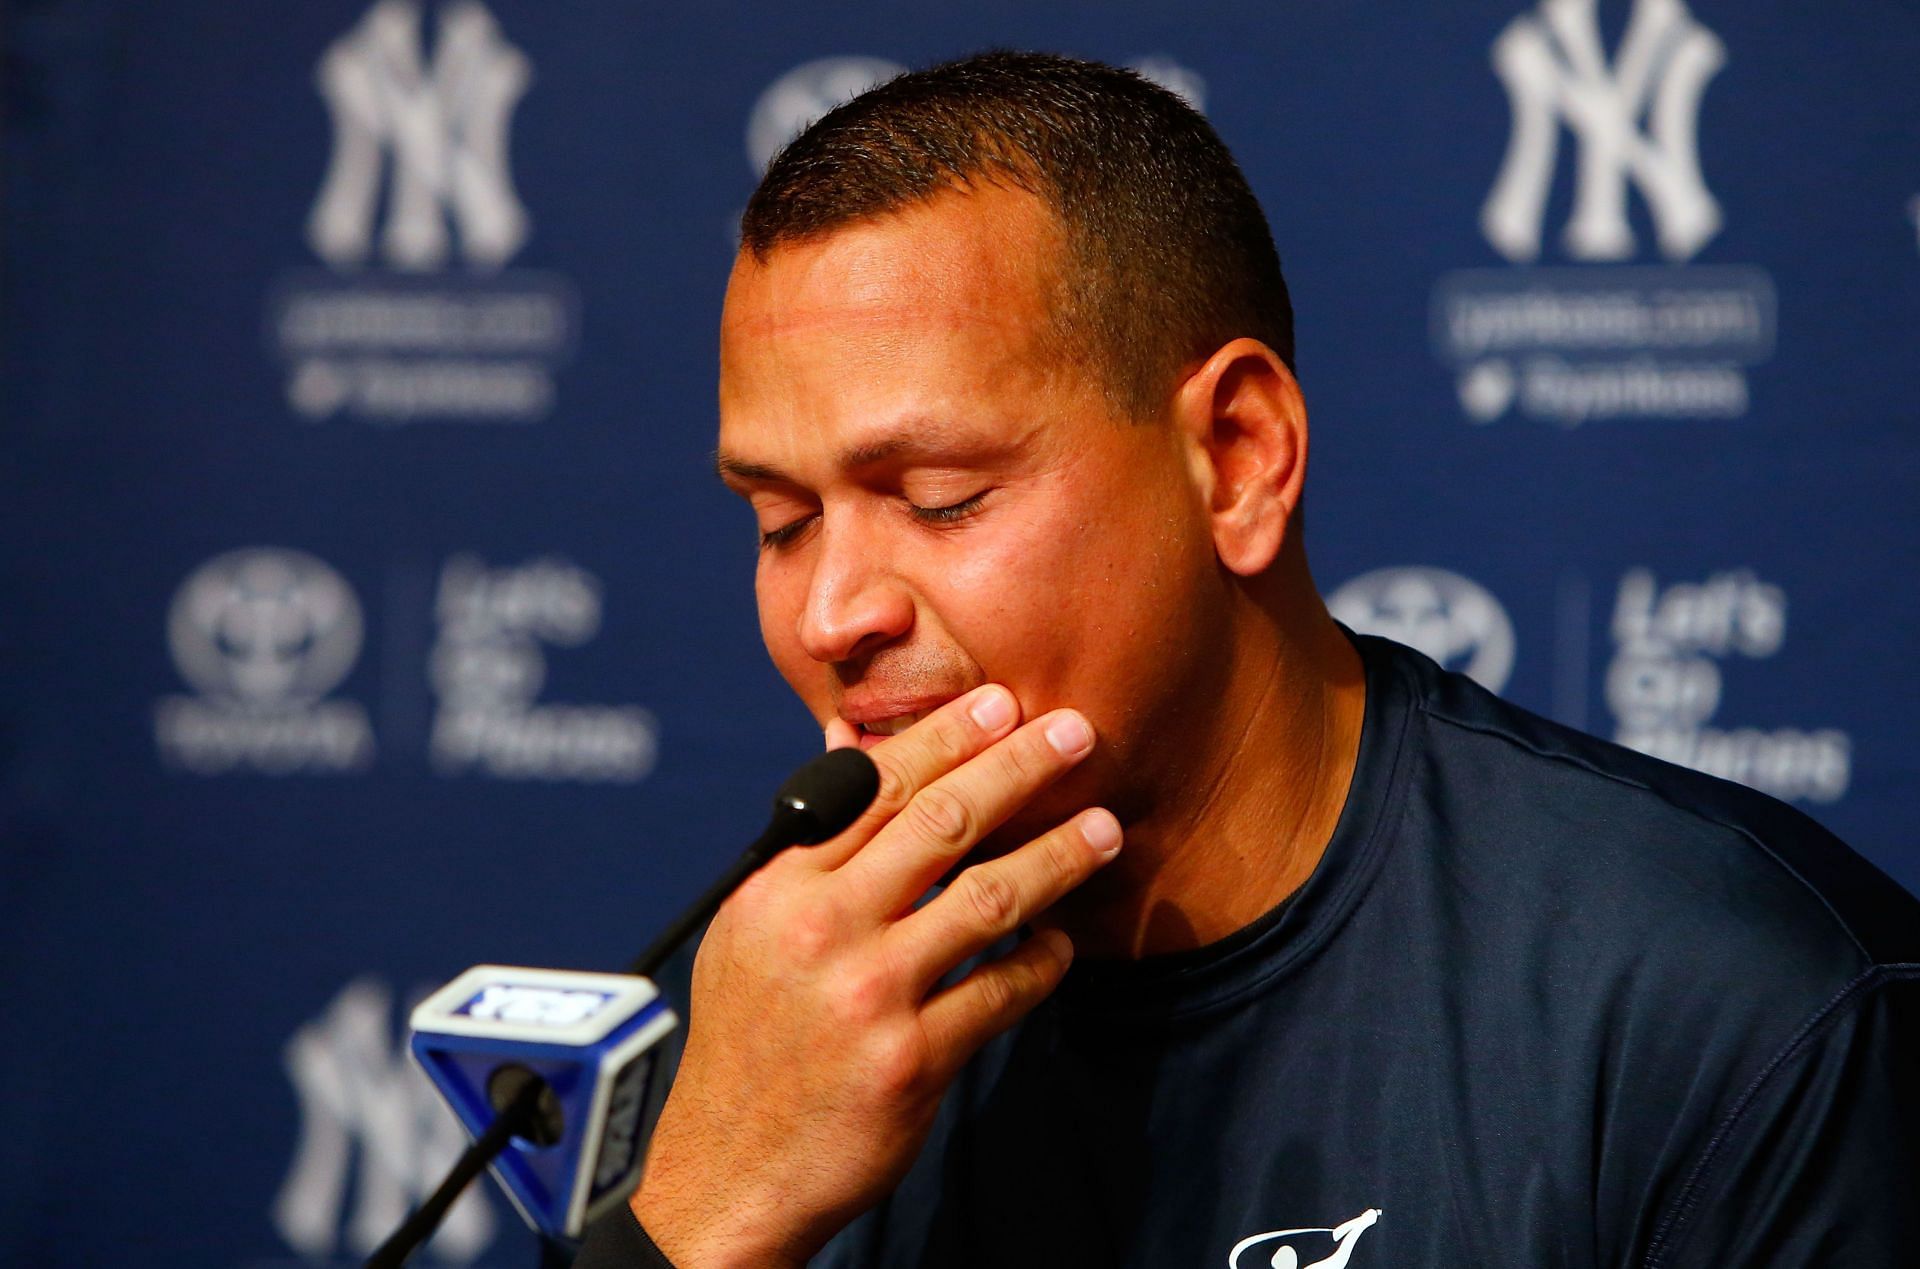 Alex Rodriguez was front and center when the Biogenesis scandal popped